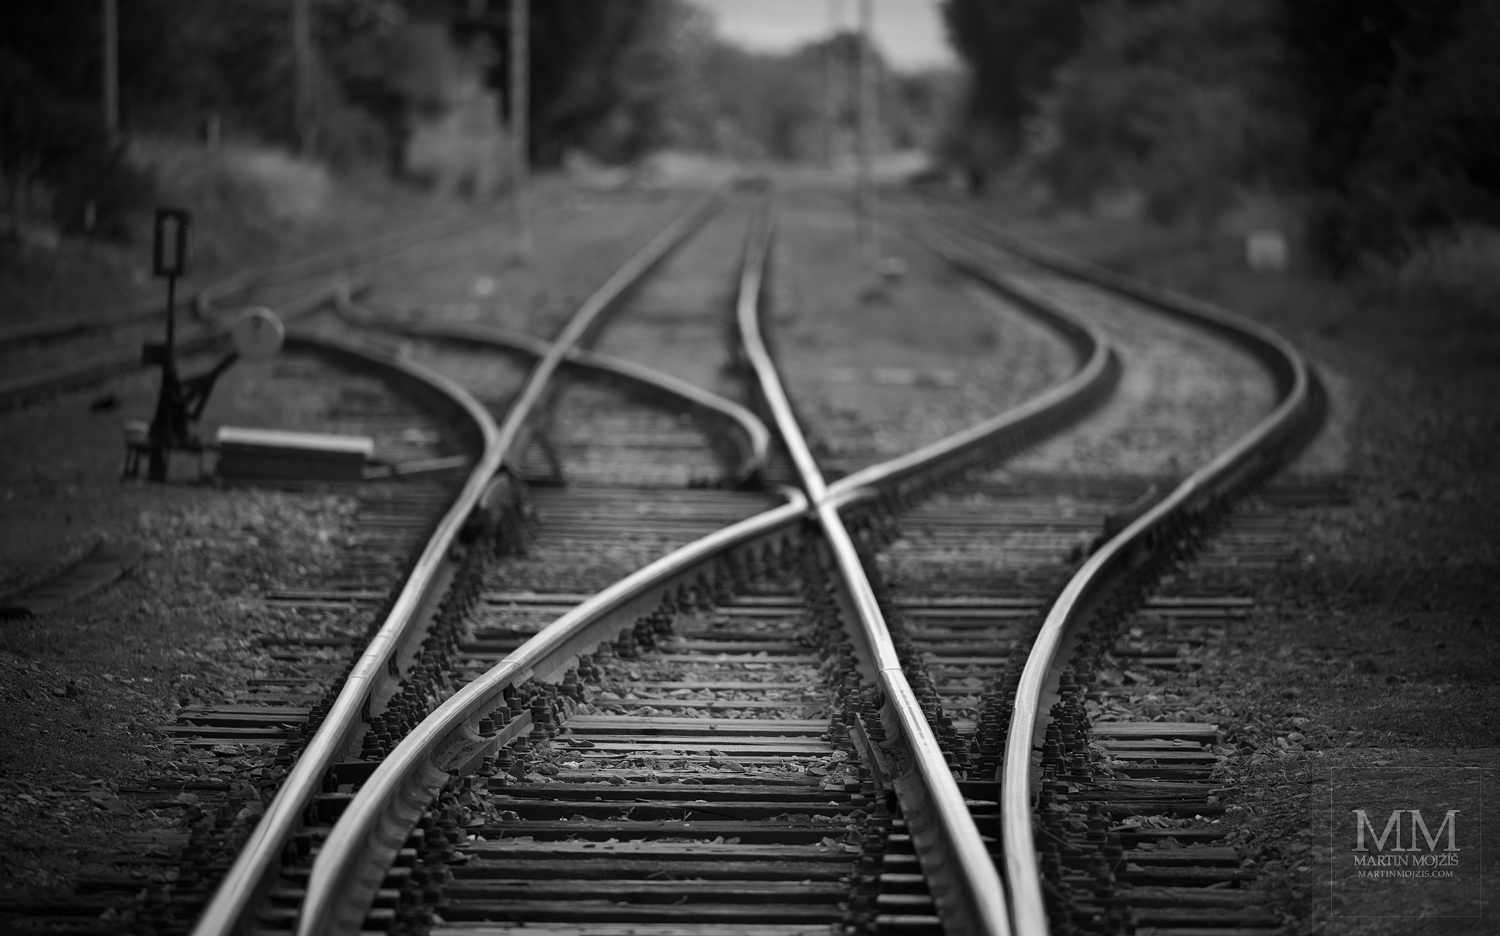 Crossroads of the railway tracks. Fine art black and white photograph CROSSROADS IV, photographed by Martin Mojzis.